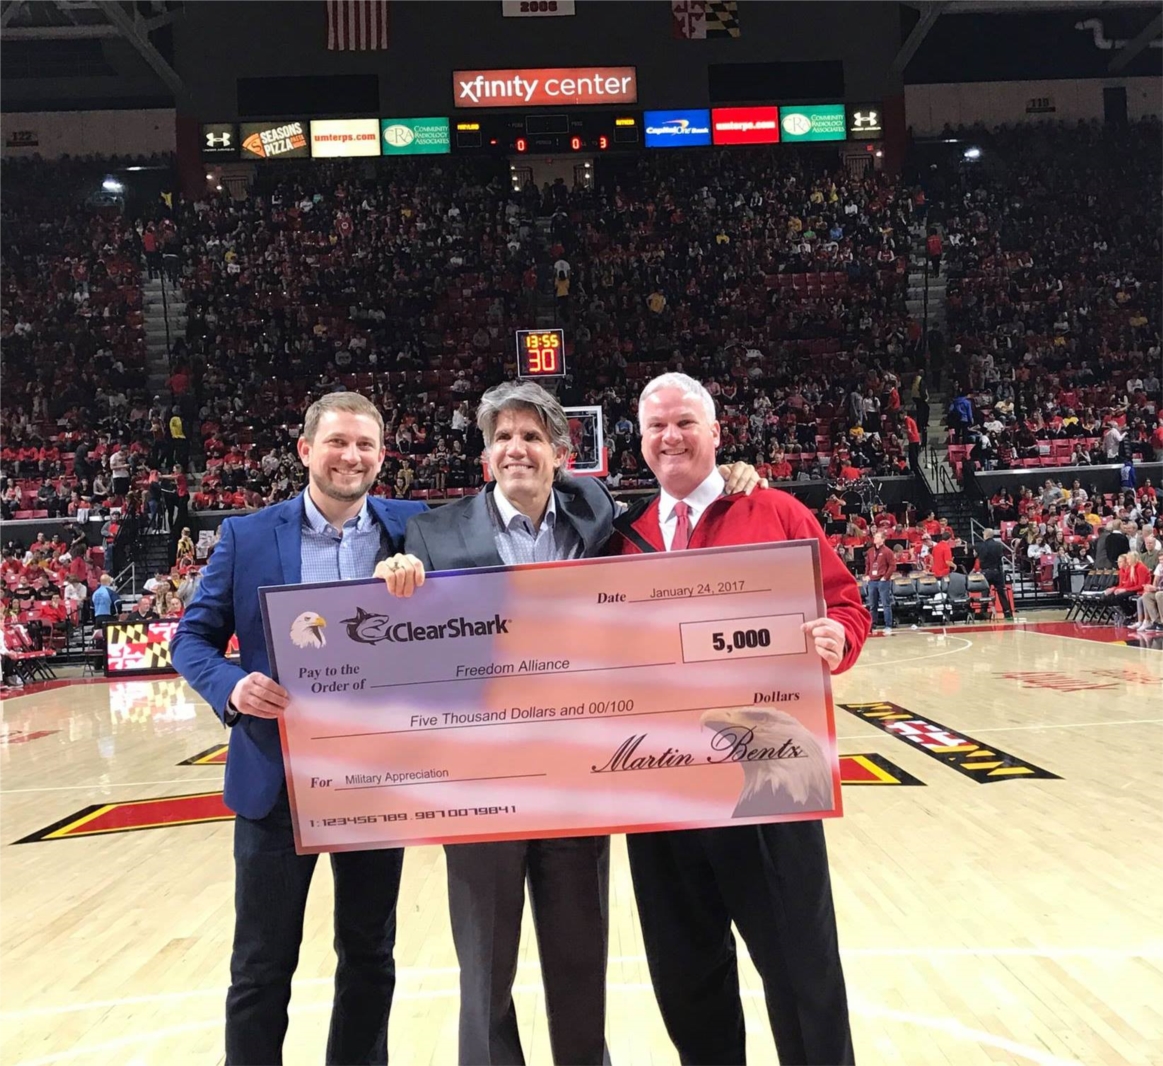 ClearShark is proud to partner with University of Maryland Athletics and to donate to wonderful organizations like Freedom Alliance!